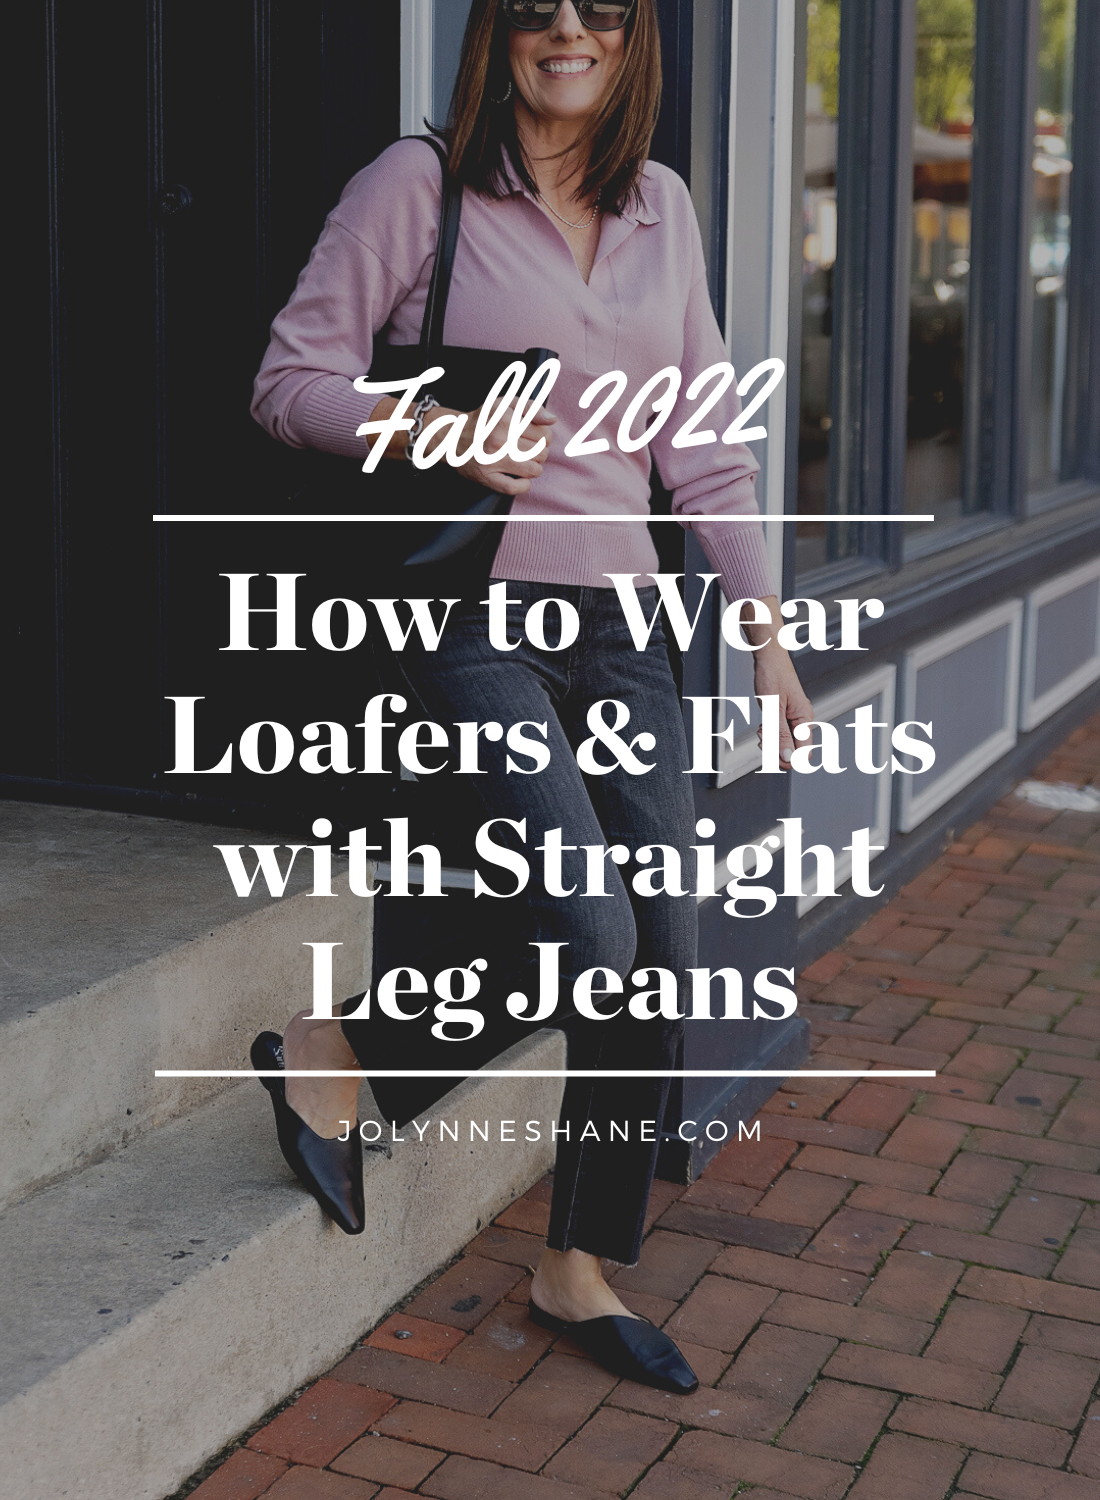 How to Wear Loafers with Straight Leg Jeans for Fall 2022